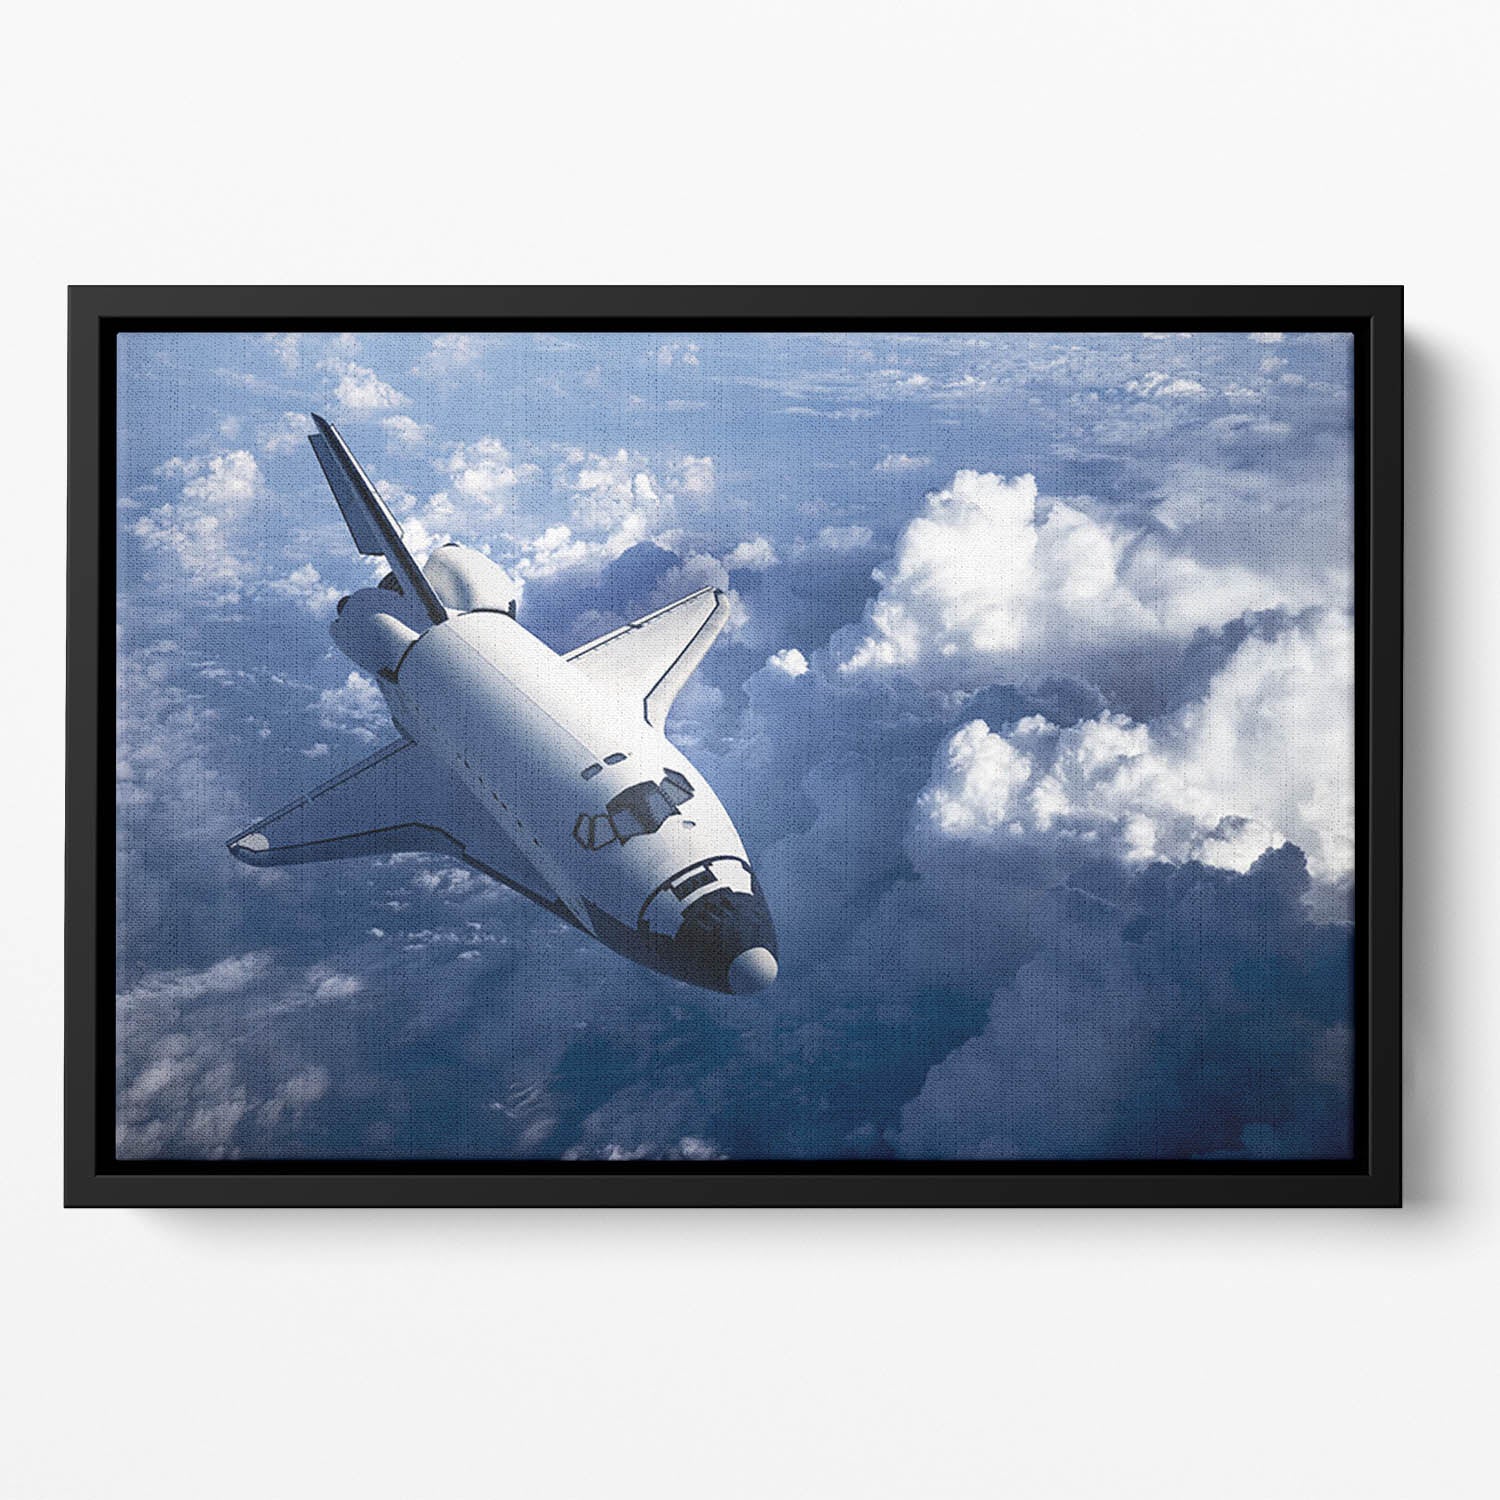 Space Shuttle in the Clouds Floating Framed Canvas